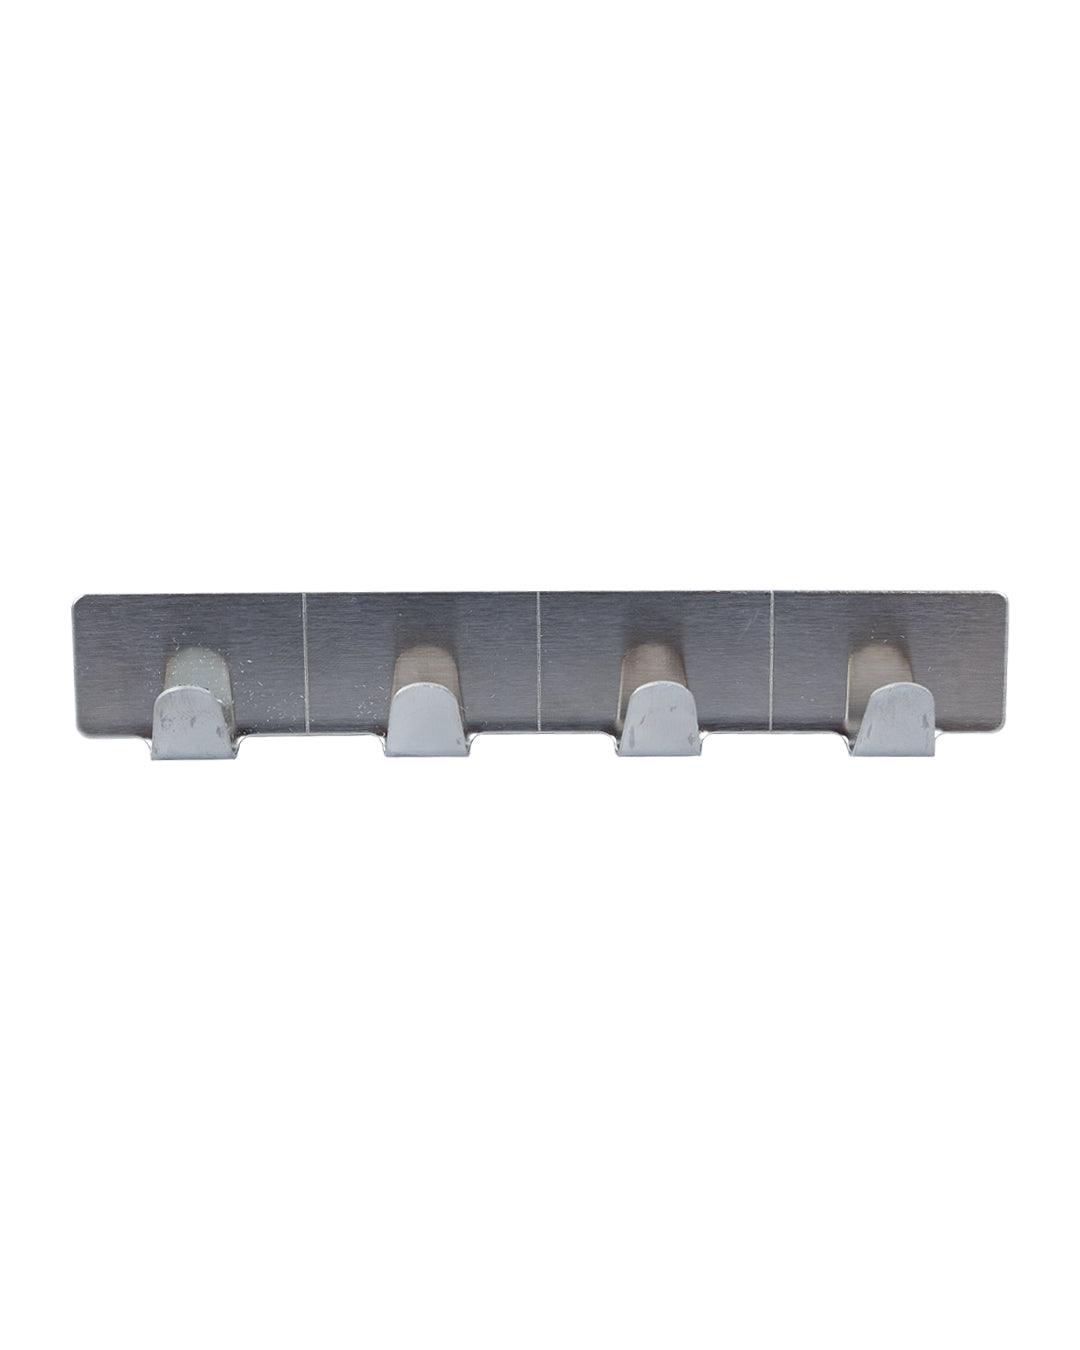 Metal Sticky Hook Bar with 4 Knobs Self Adhesive Back, Silver, Stainless Steel - MARKET 99